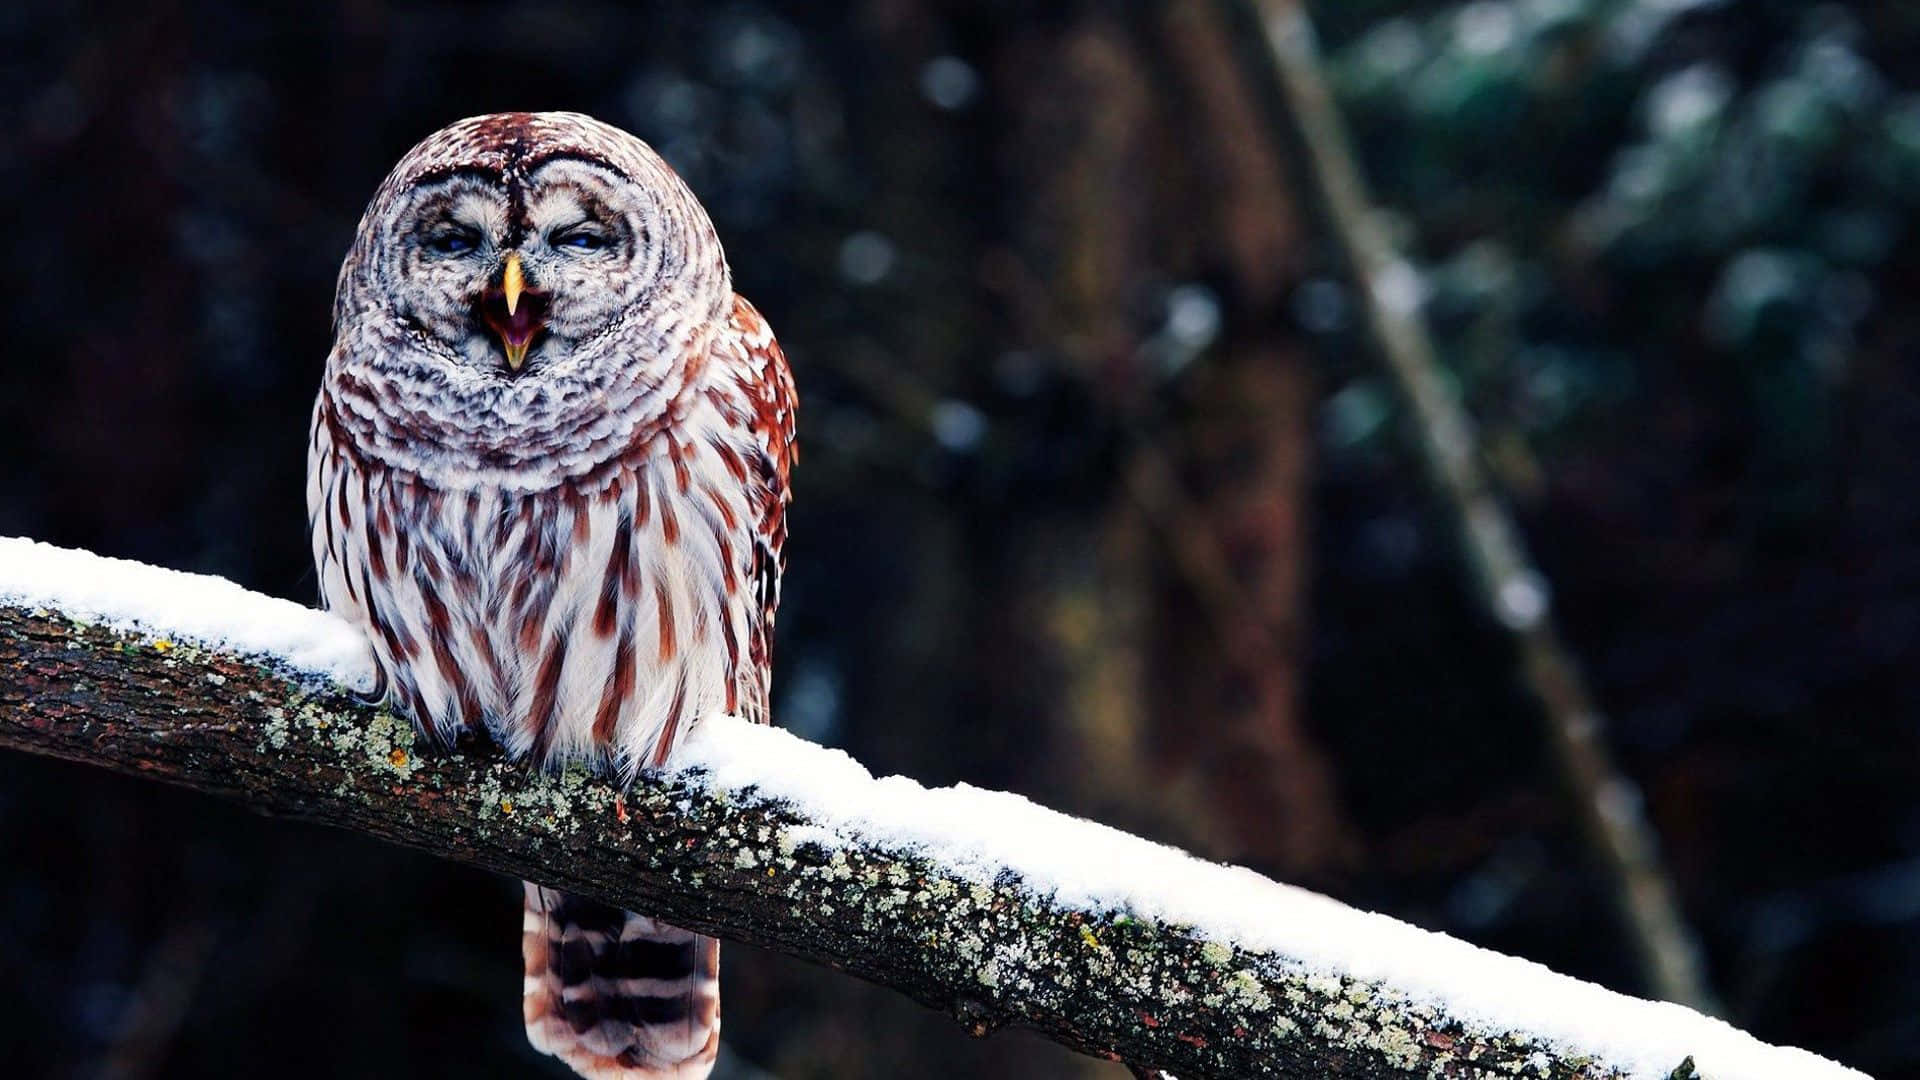 Funny Owl On Tree Branch With Snow Pictures